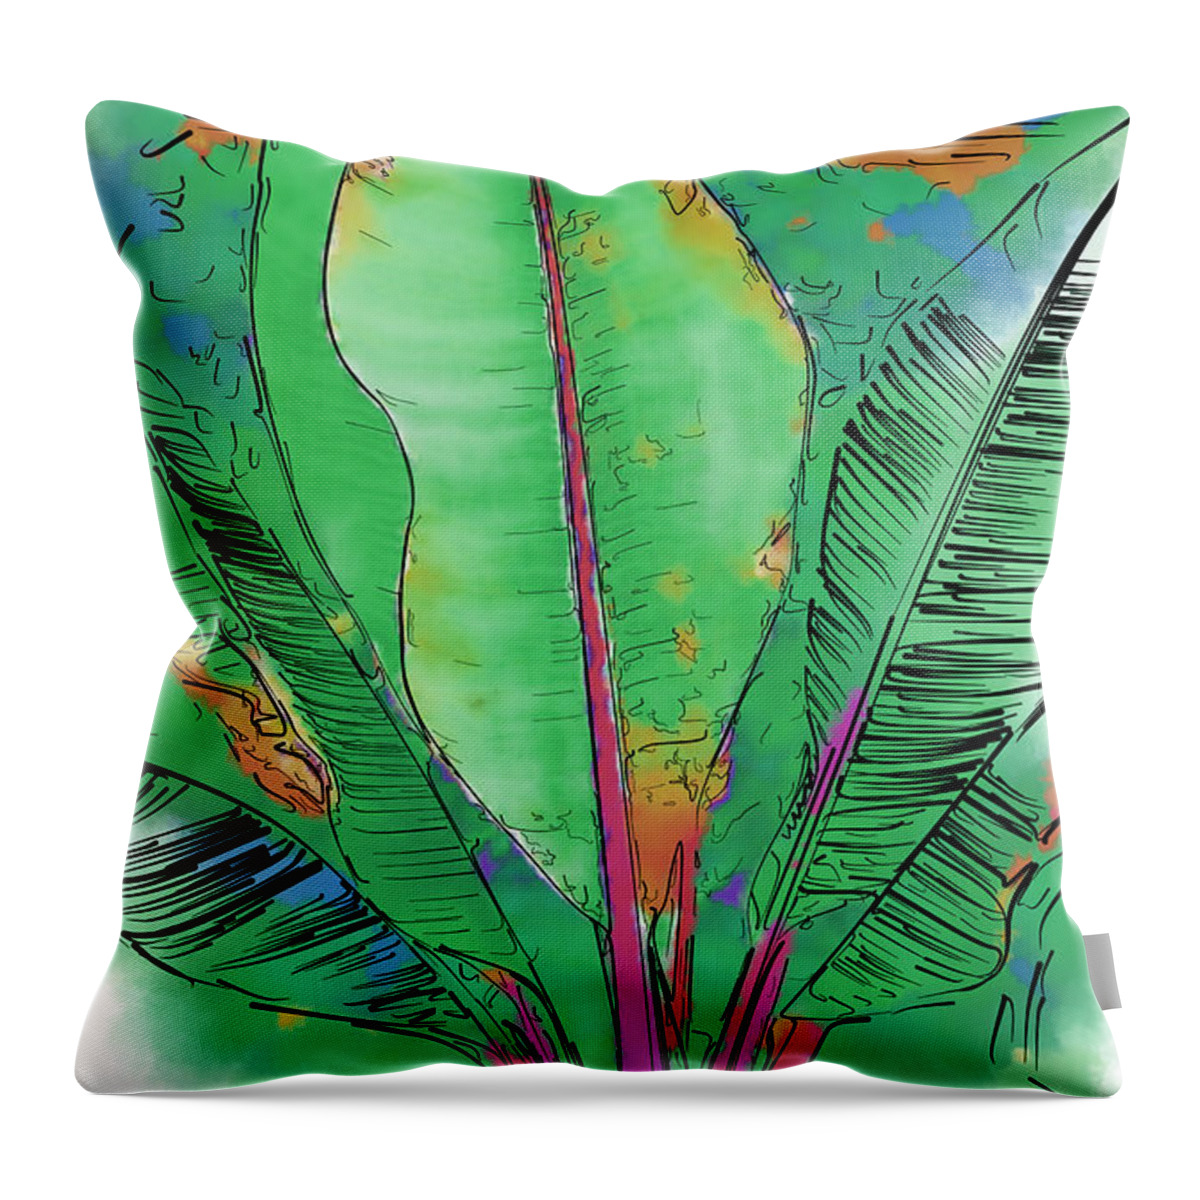 Tropical Throw Pillow featuring the painting Tropical Foliage by Kirt Tisdale